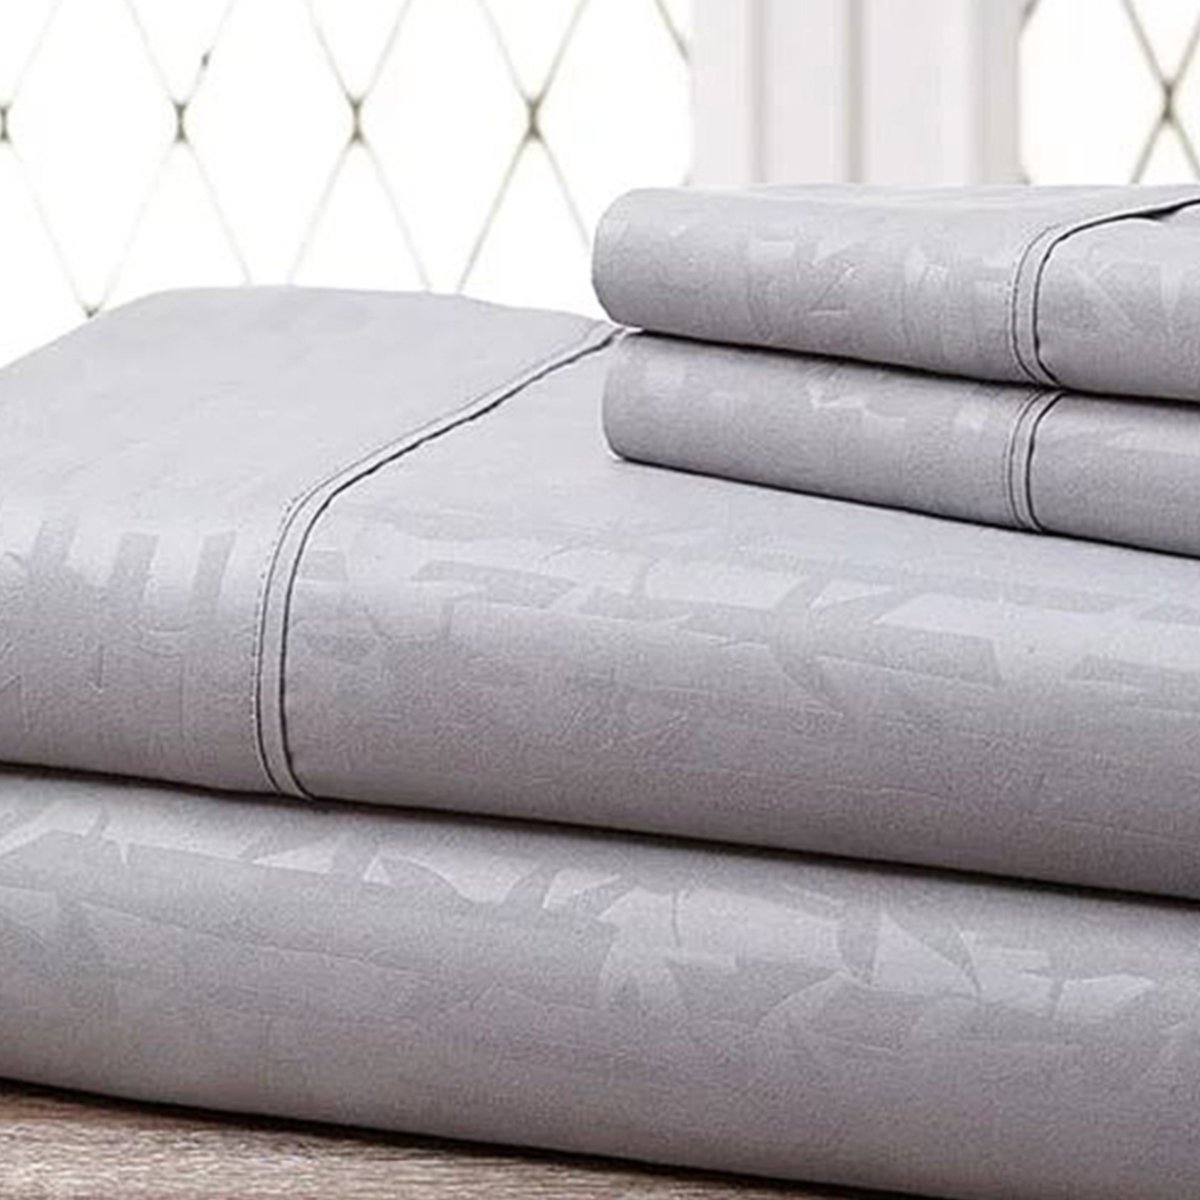 Hny-4pc-eb-gra-q Super-soft 1600 Series Bamboo Embossed Bed Sheet, Gray - Queen, 4 Piece